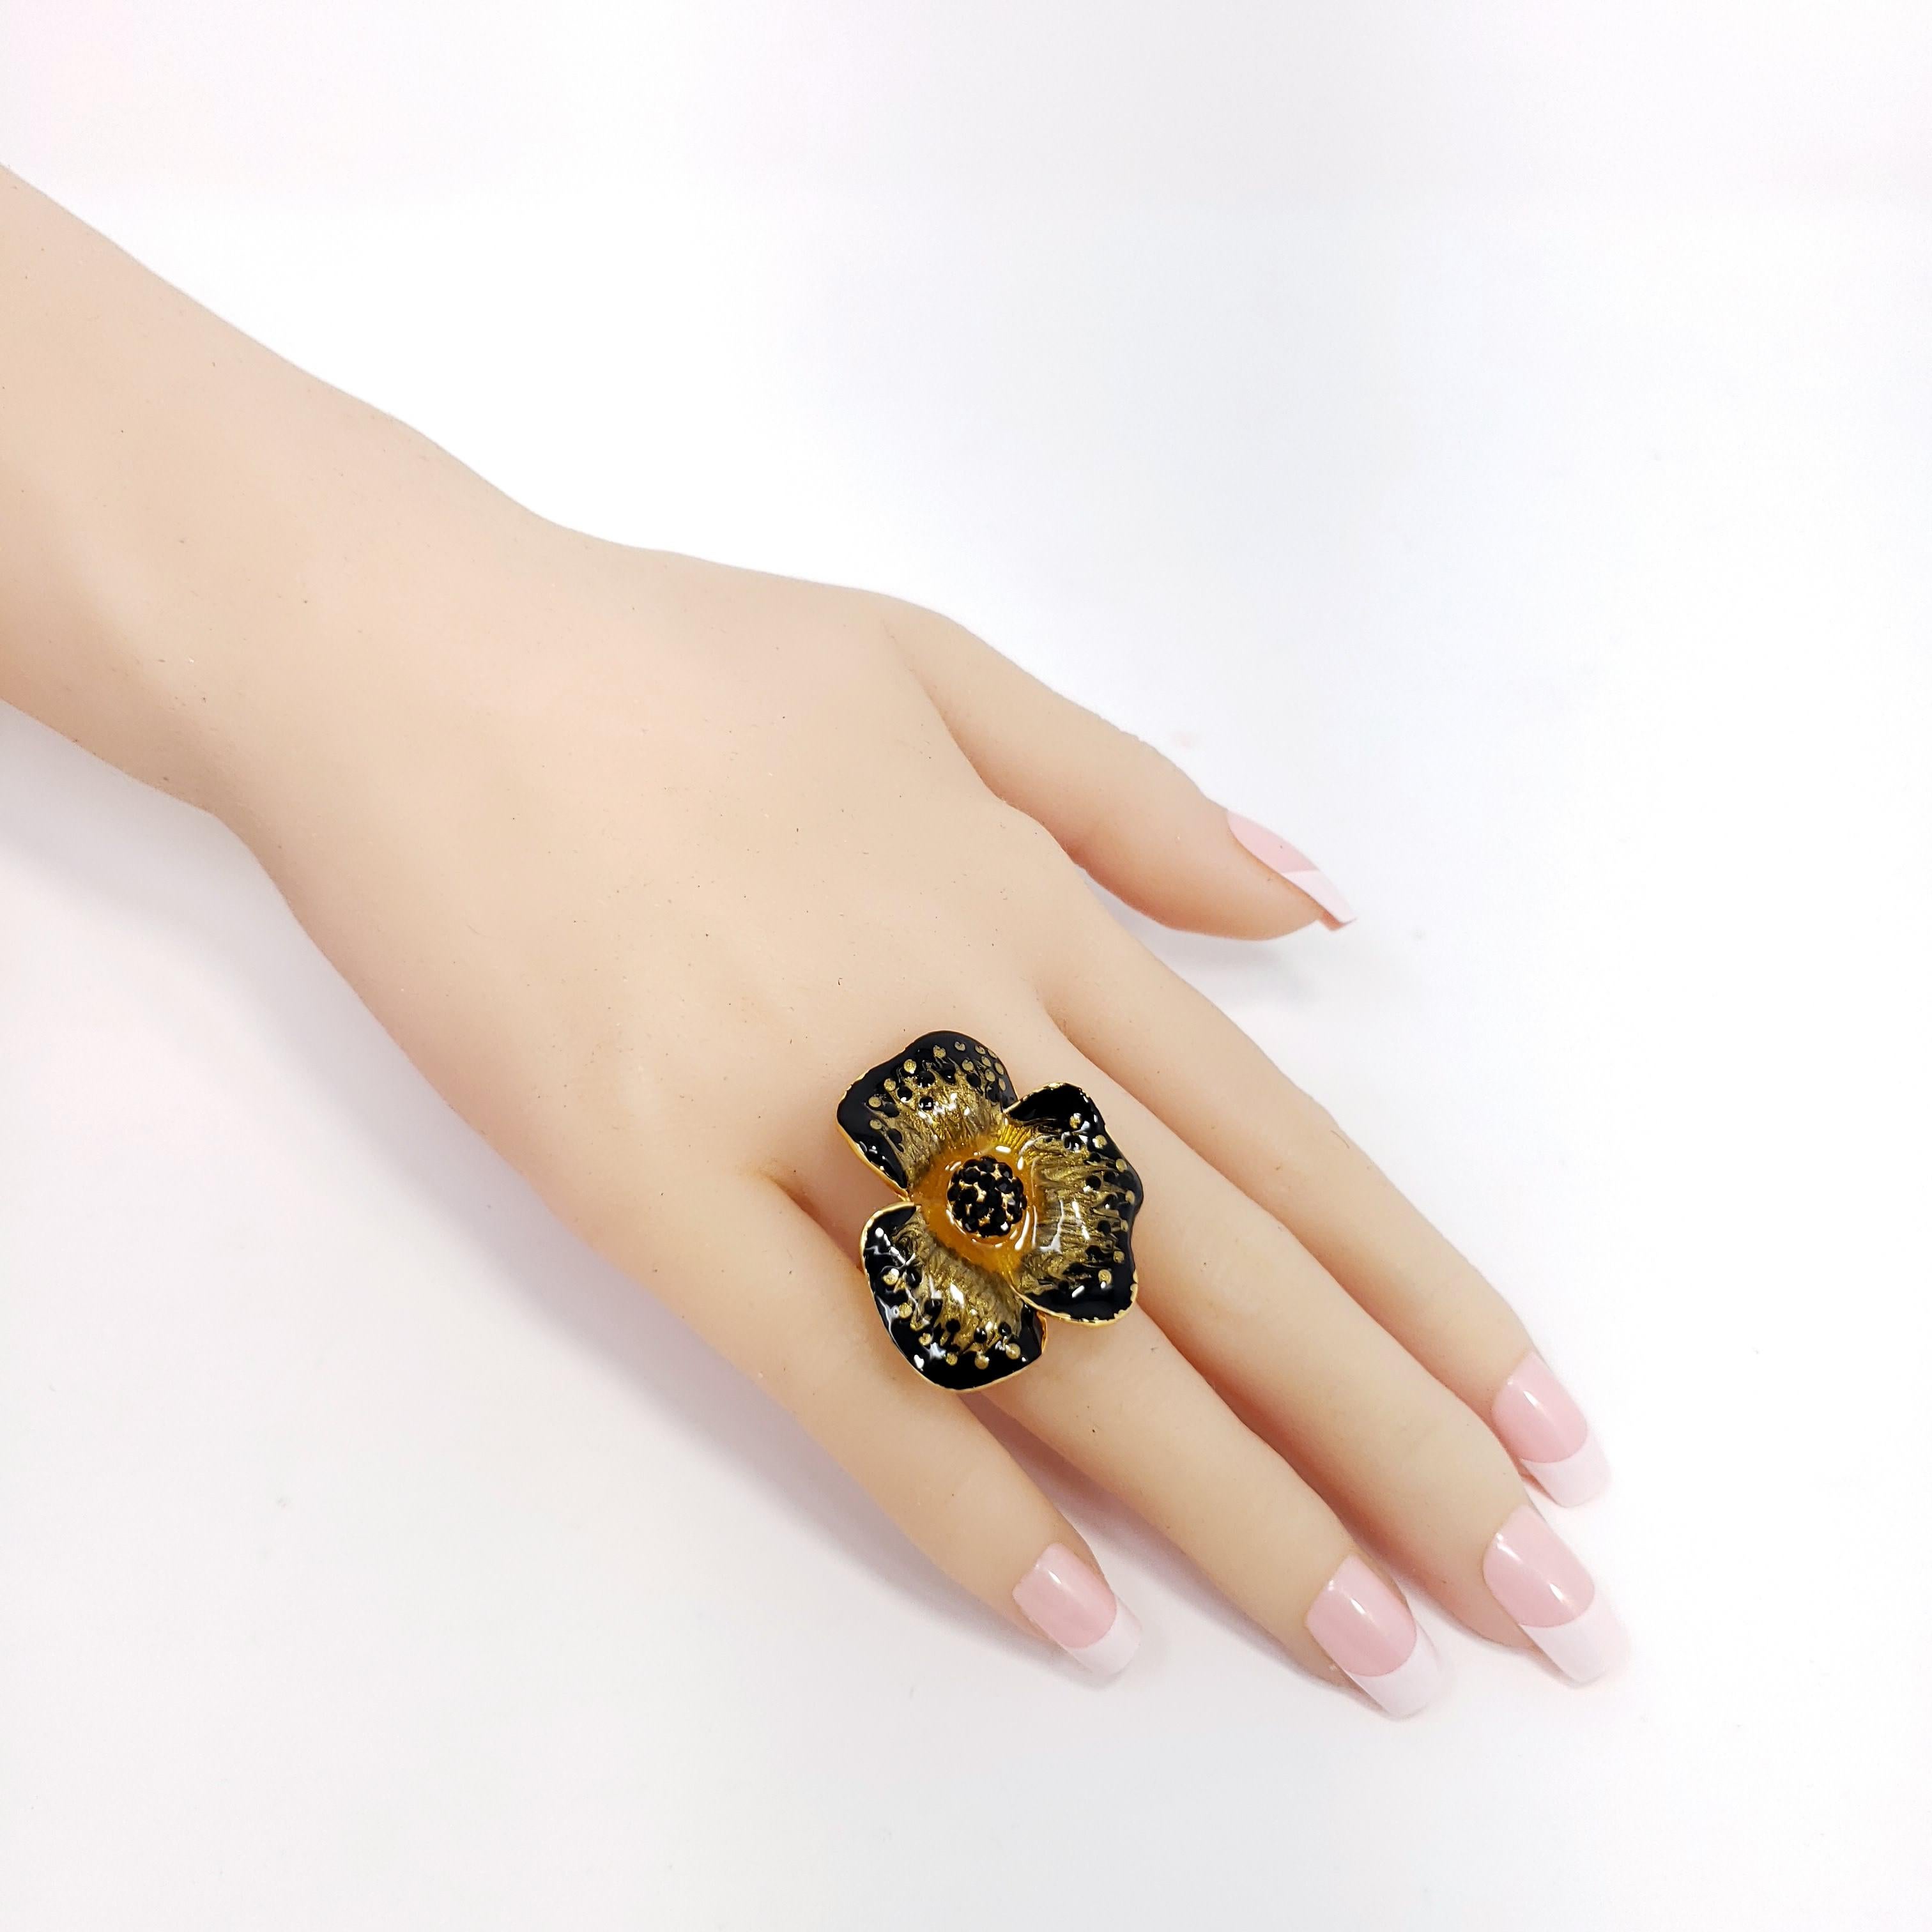 Flower power! An ornate floral statement ring featuring a blooming flower painted black and yellow enamel and accented with jet-black crystals. Set on gold plated metal.

Ring size US 8.5

Hallmarks: Jay, Jay Strongwater, CN

By Jay Strongwater,